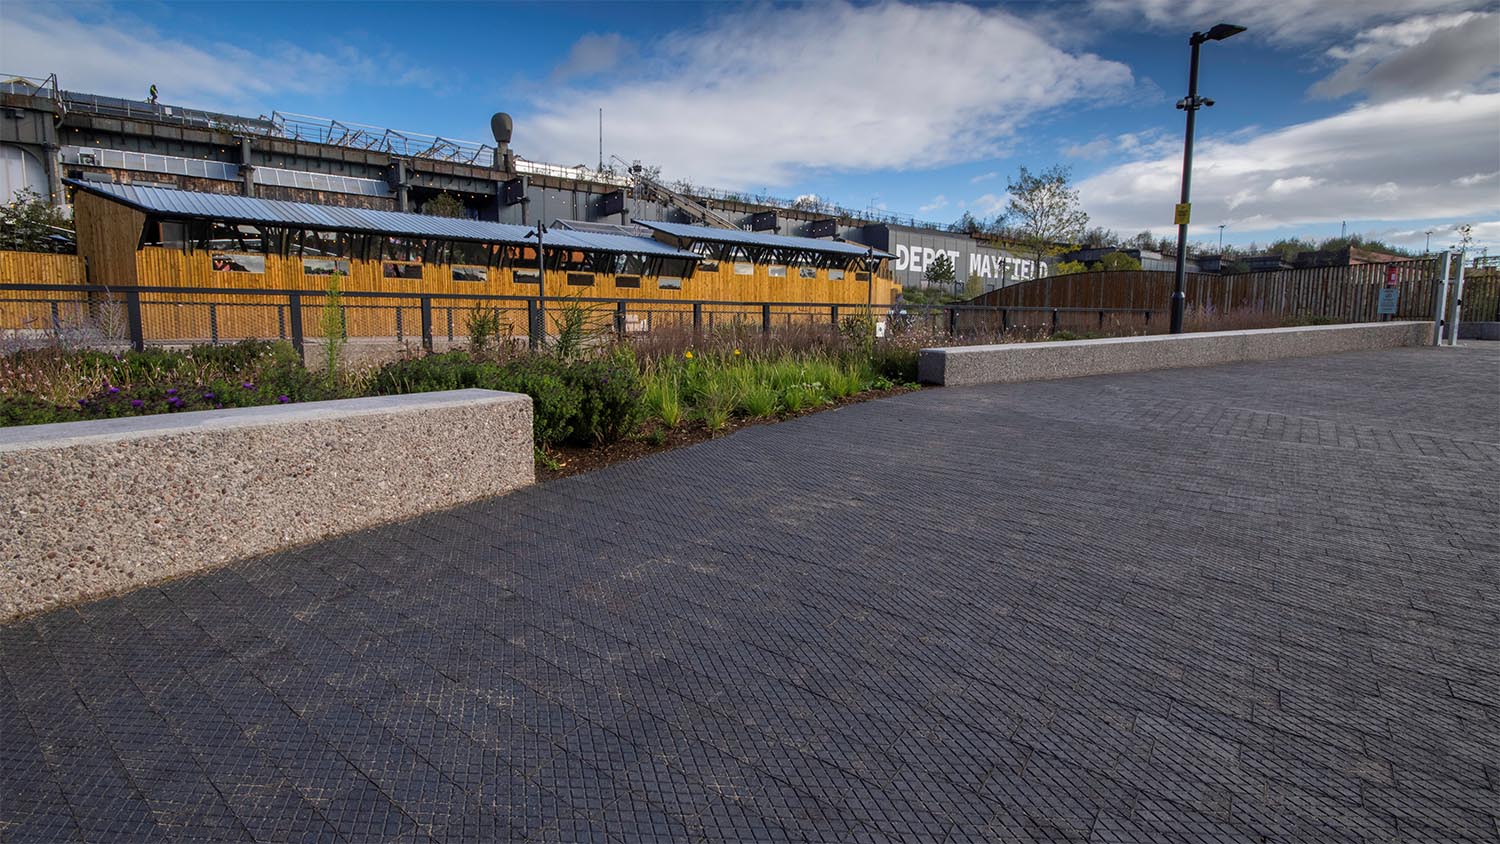 staffs blue diamond chequer pavers perfectly suited the industrial heritage of AJ Award winning Mayfield Park image by Hardscape